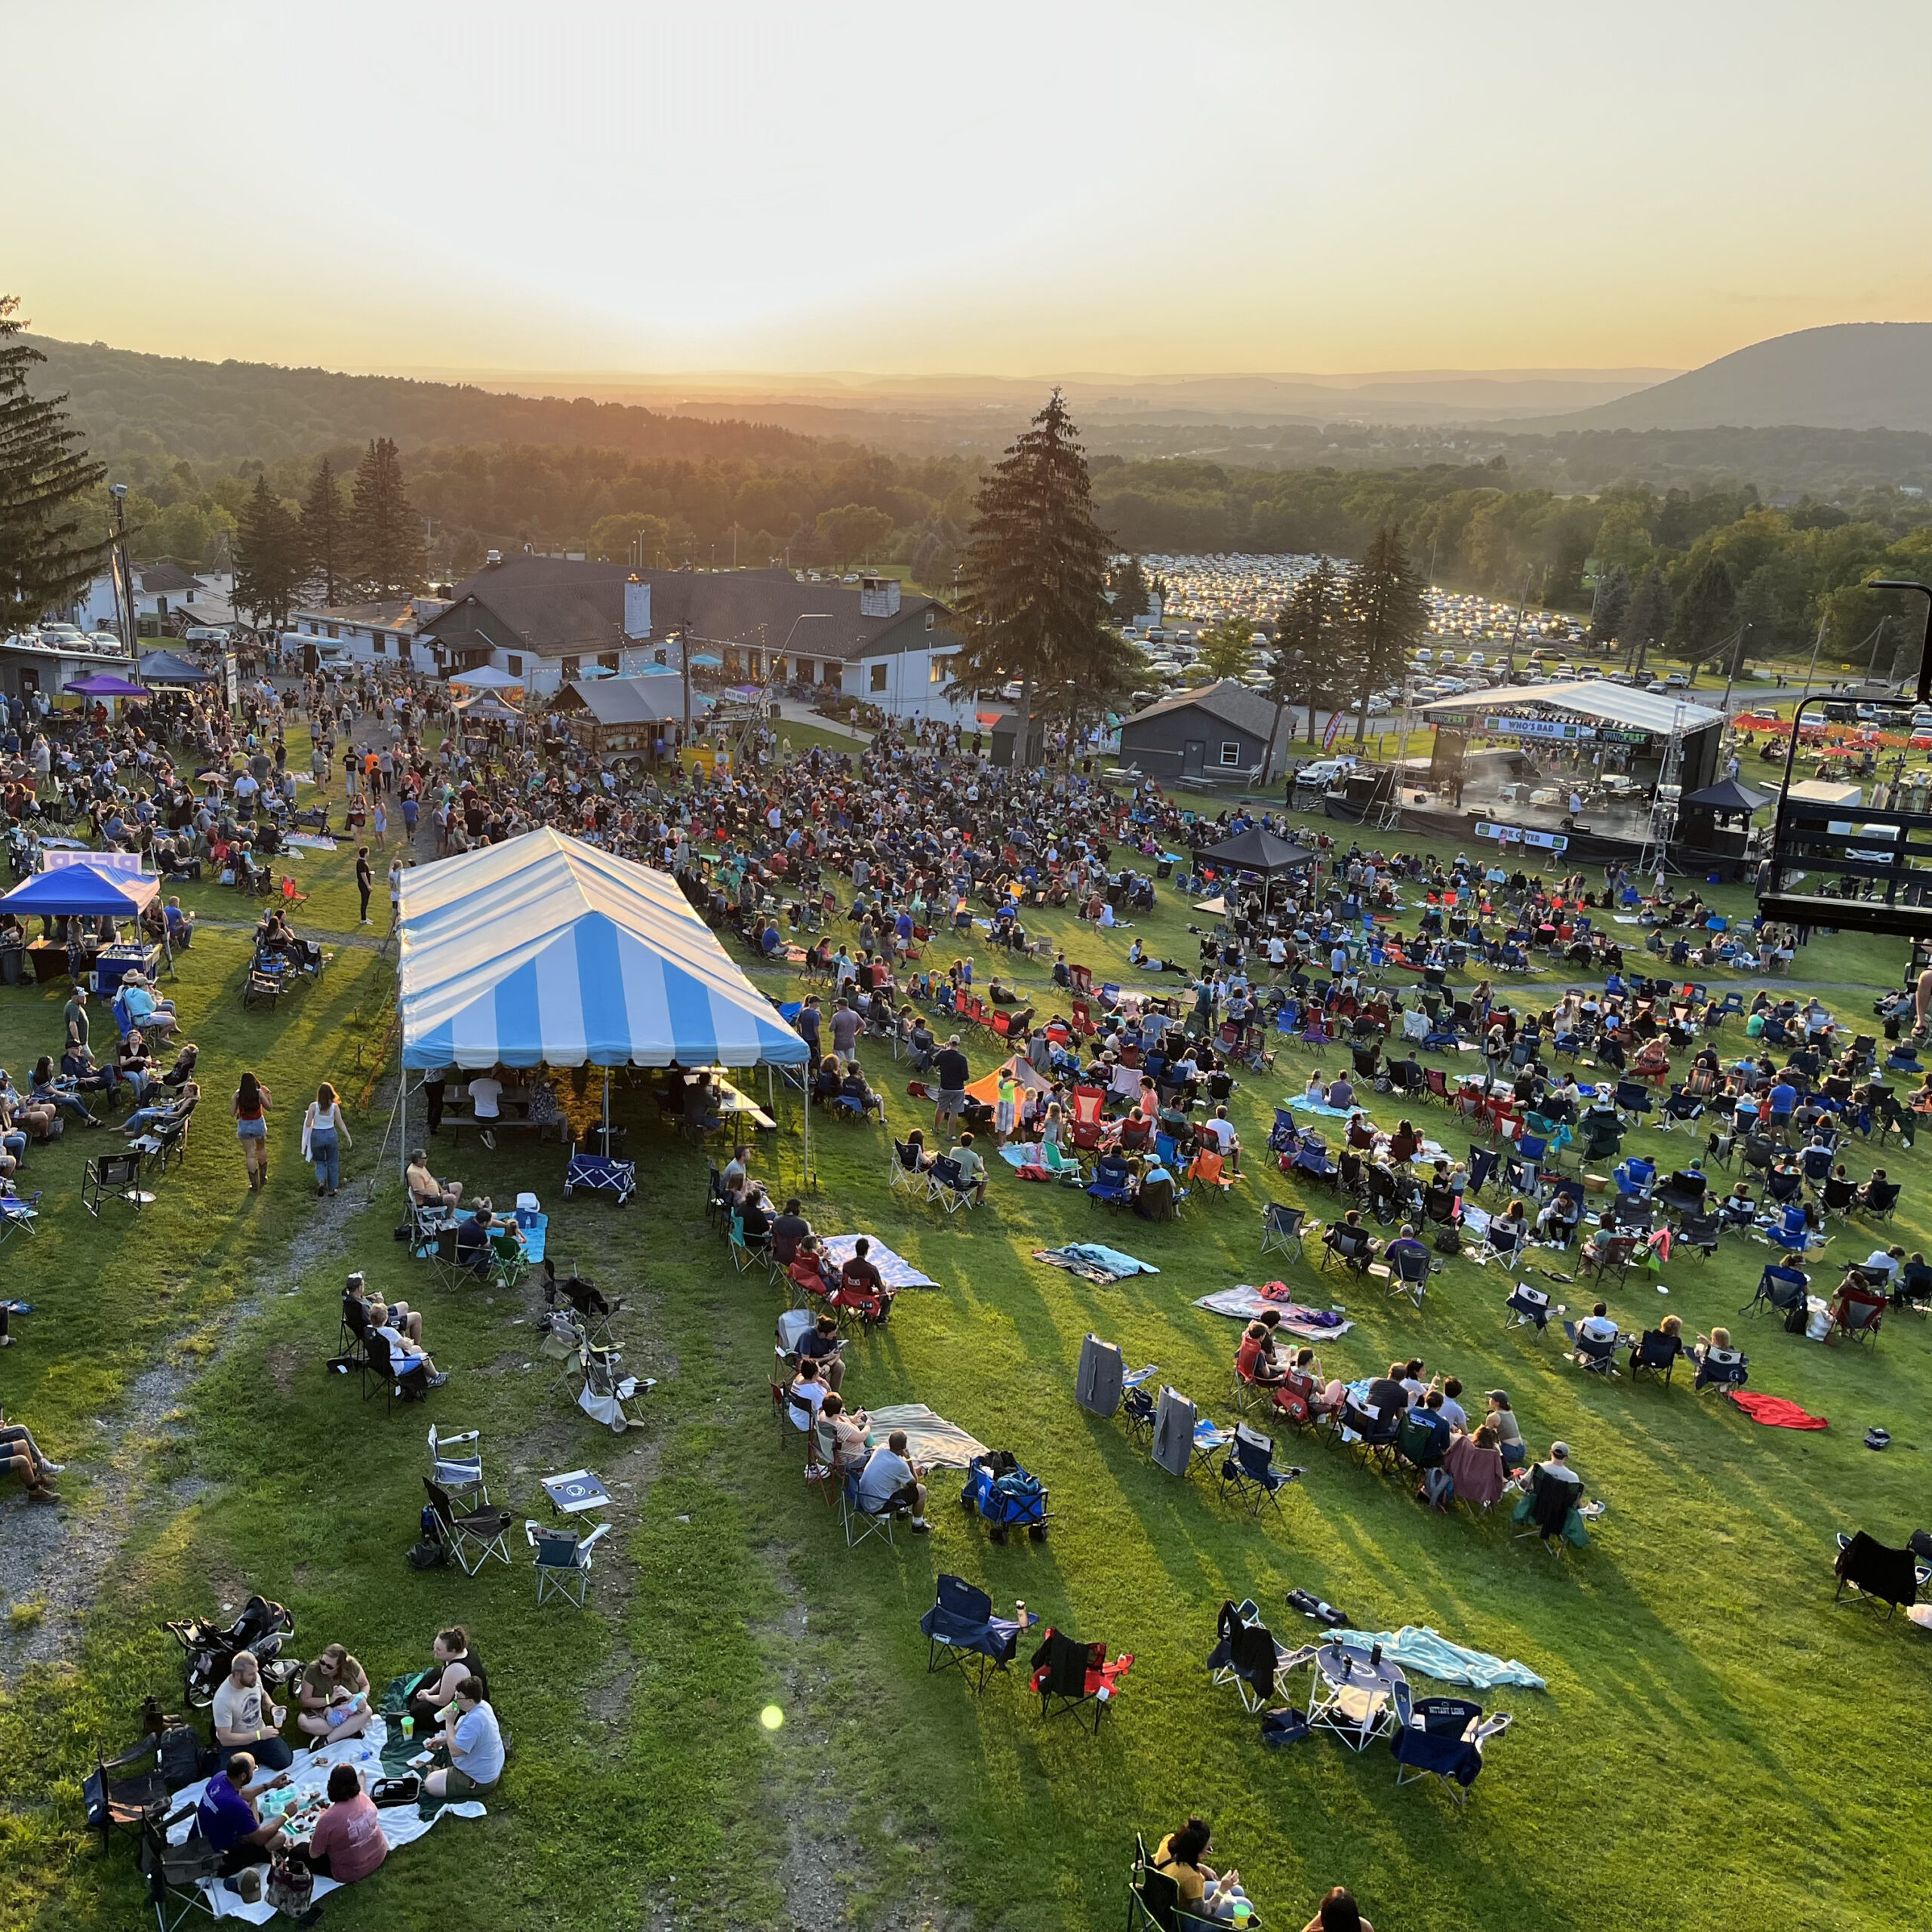 Aerial view of WingFest tent at sunset surrounded by people and Mount Nittany in the background